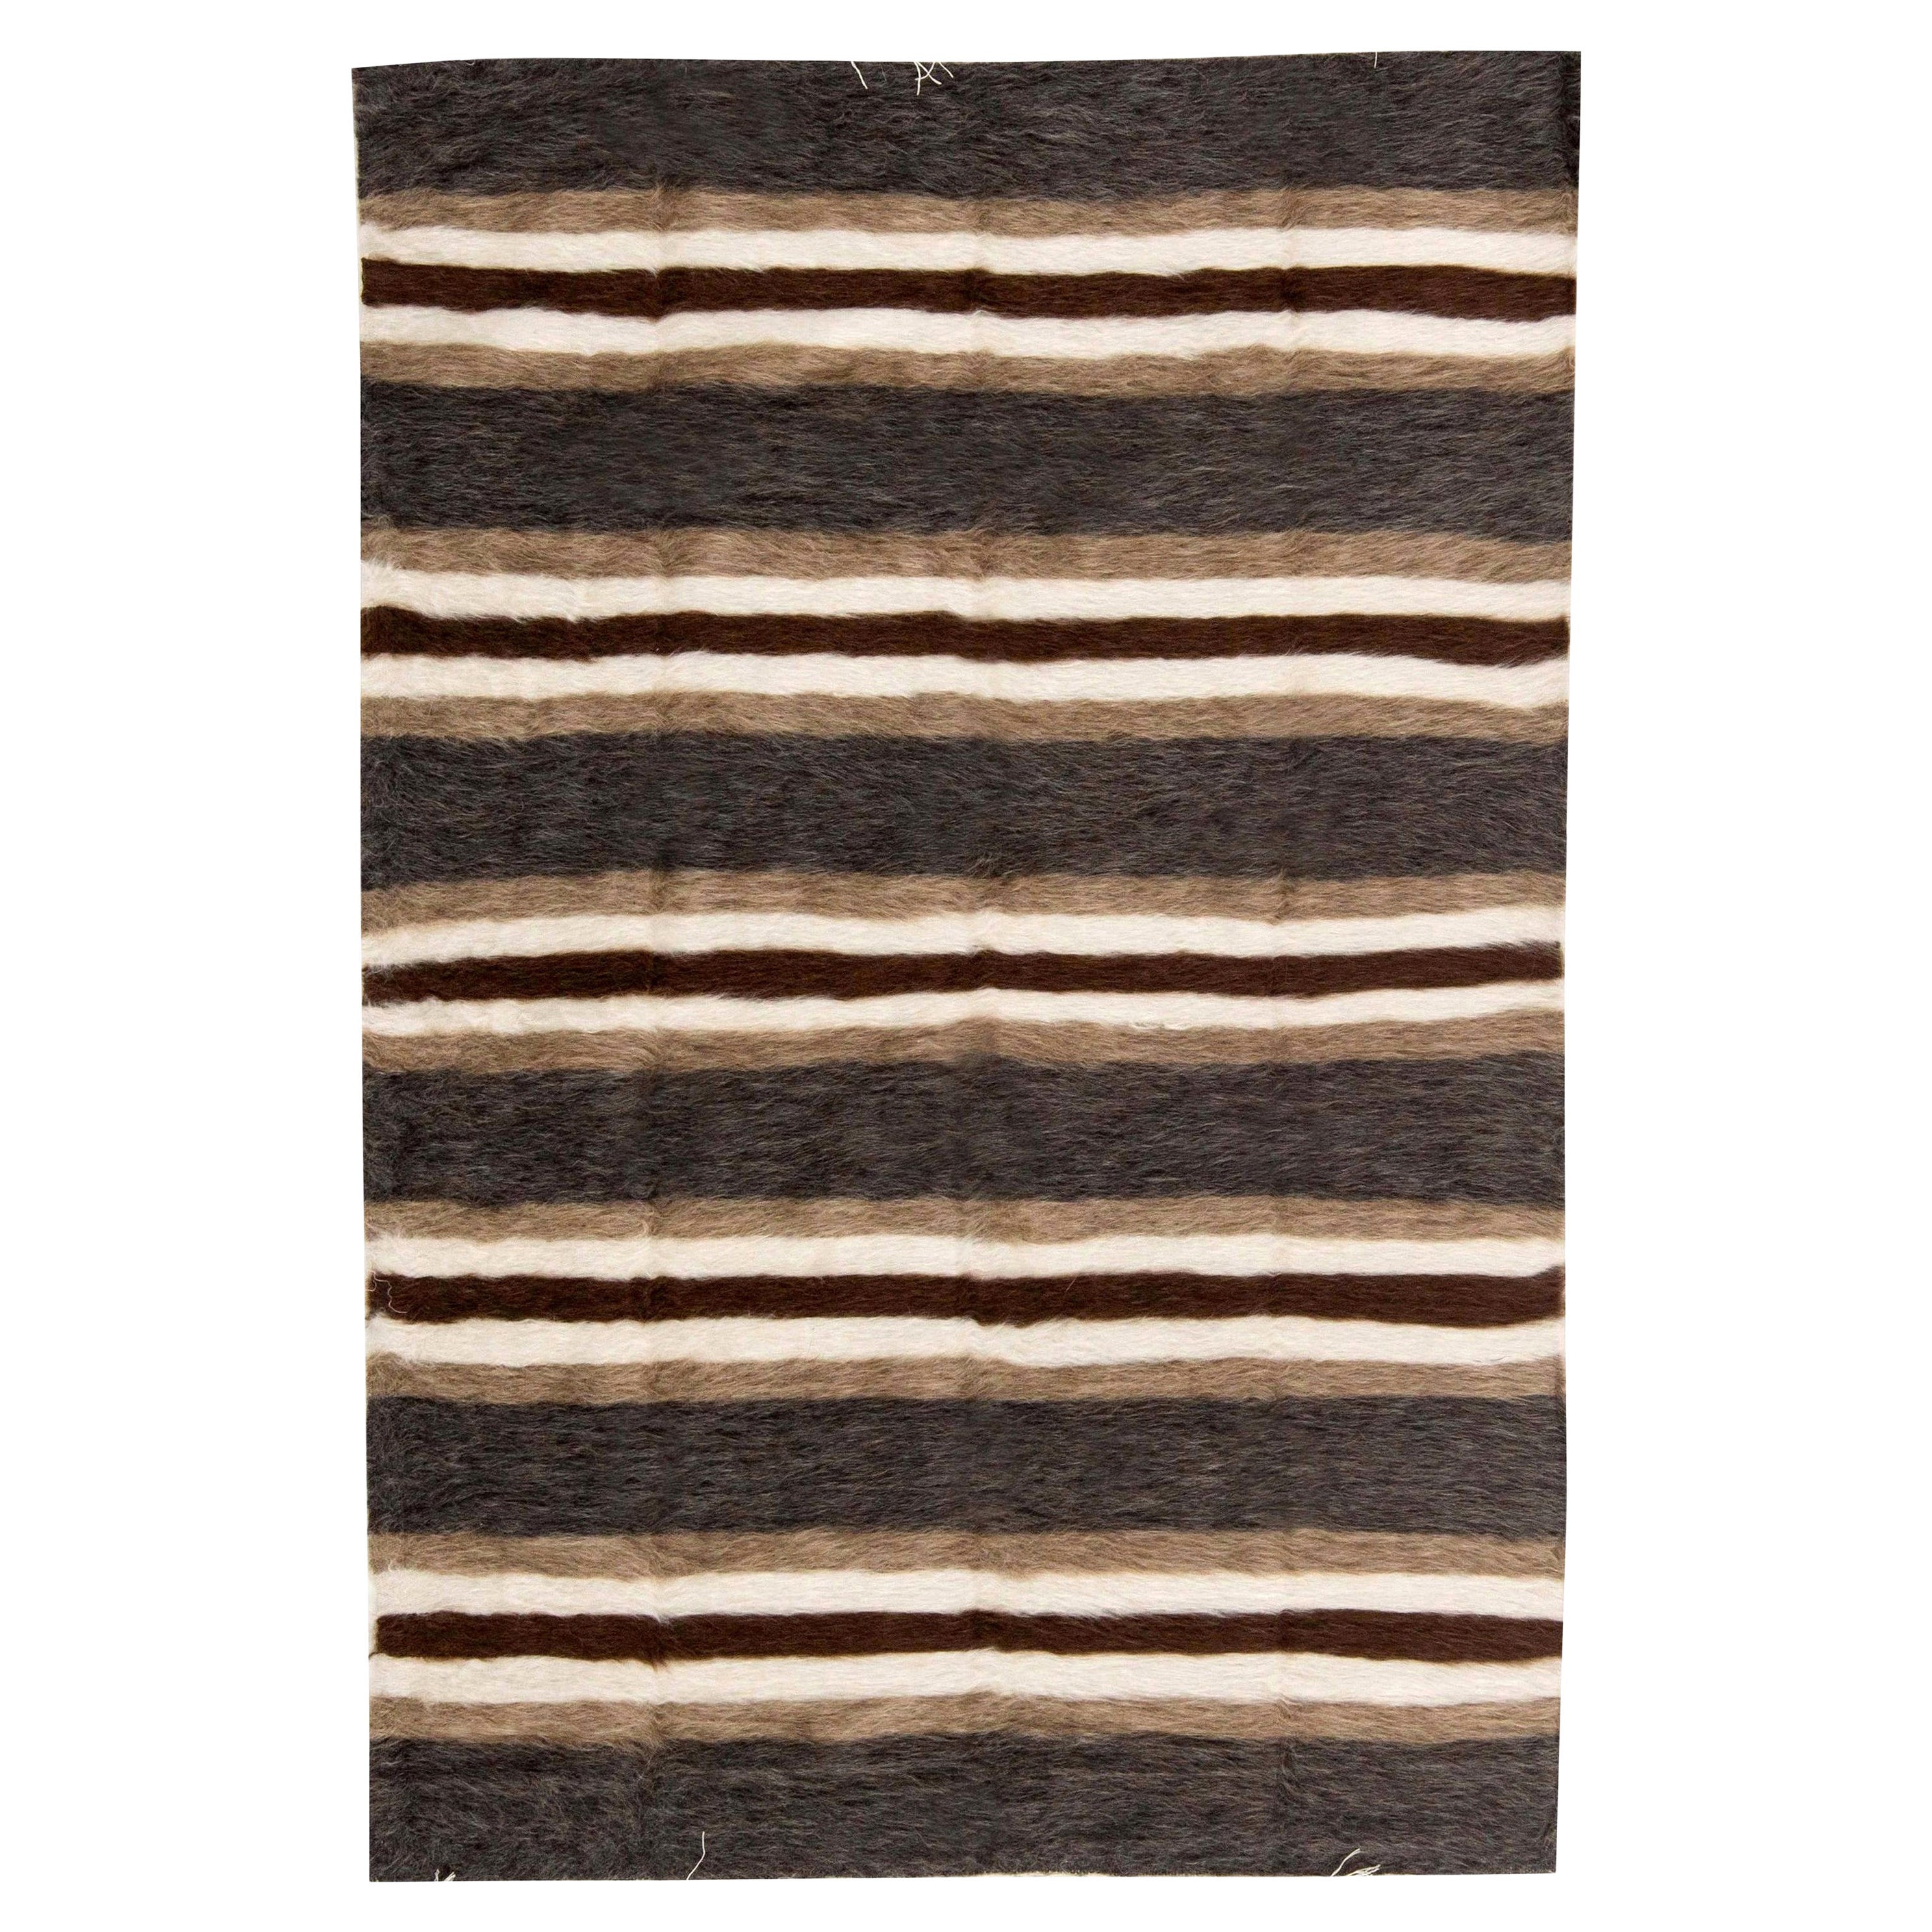 Taurus Collection Striped Brown, White, Grey, Goat Hair Rug by Doris Leslie Blau For Sale